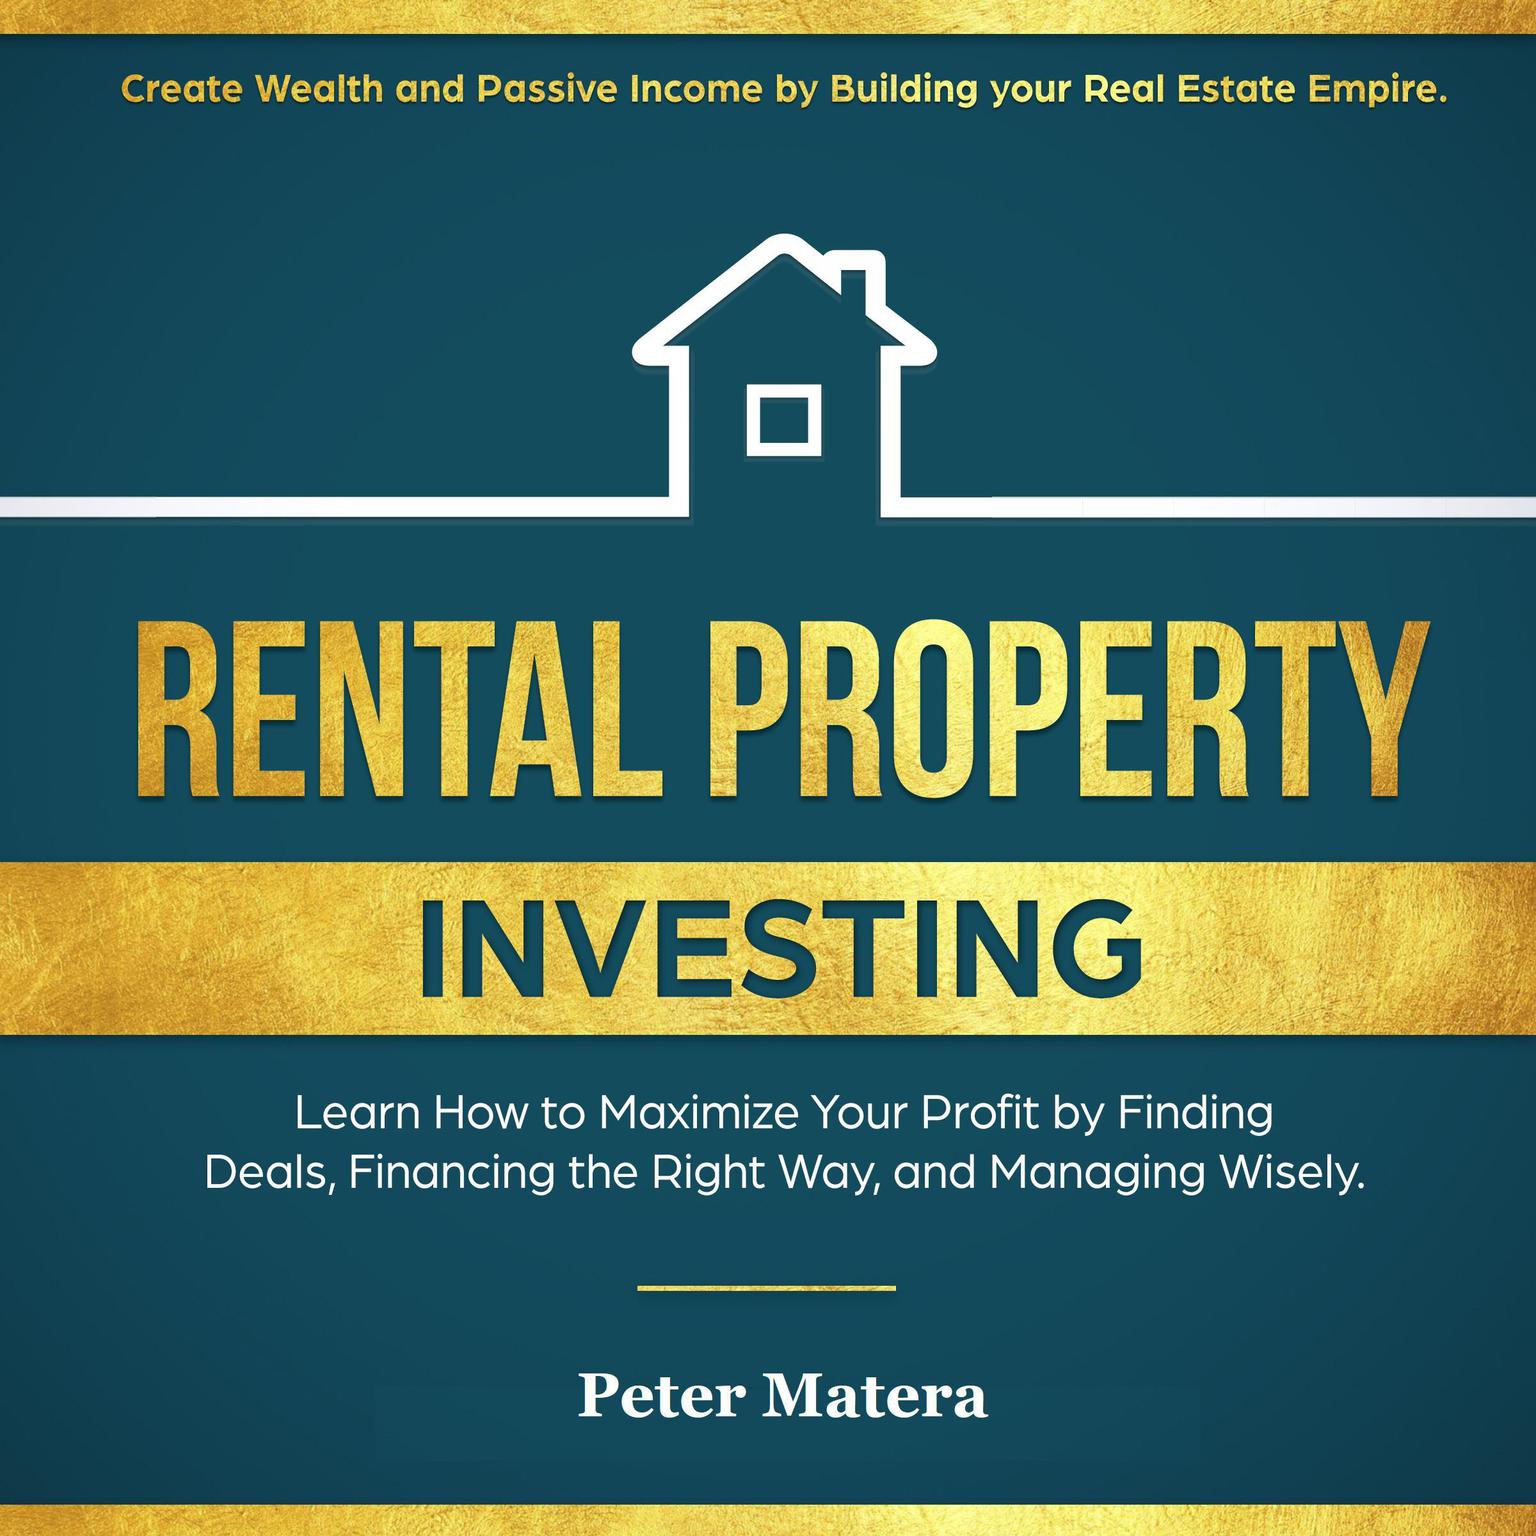 Rental Property Investing: Create Wealth and Passive Income Building your Real Estate Empire. Learn how to Maximize your profit Finding Deals, Financing the Right Way, and Managing Wisely.: Create Wealth and Passive Income Building your Real Estate Empire. Learn how to Maximize your profit Finding Deals, Financing the Right Way, and Managing Wisely. Audiobook, by Peter Matera